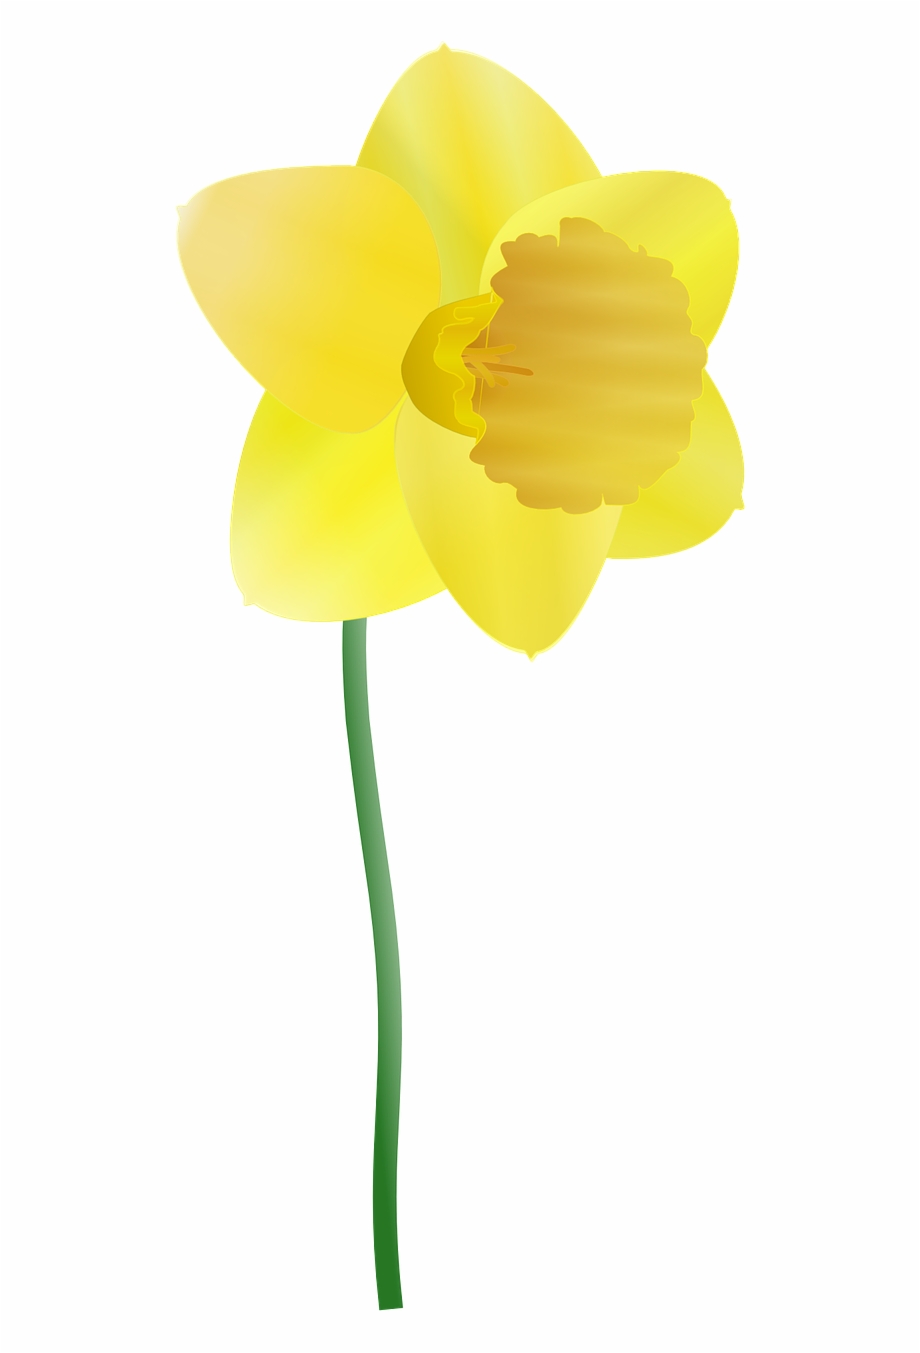 Daffodil Yellow Flower Spring Png Image Daffodil Clipart - Clip Art Library